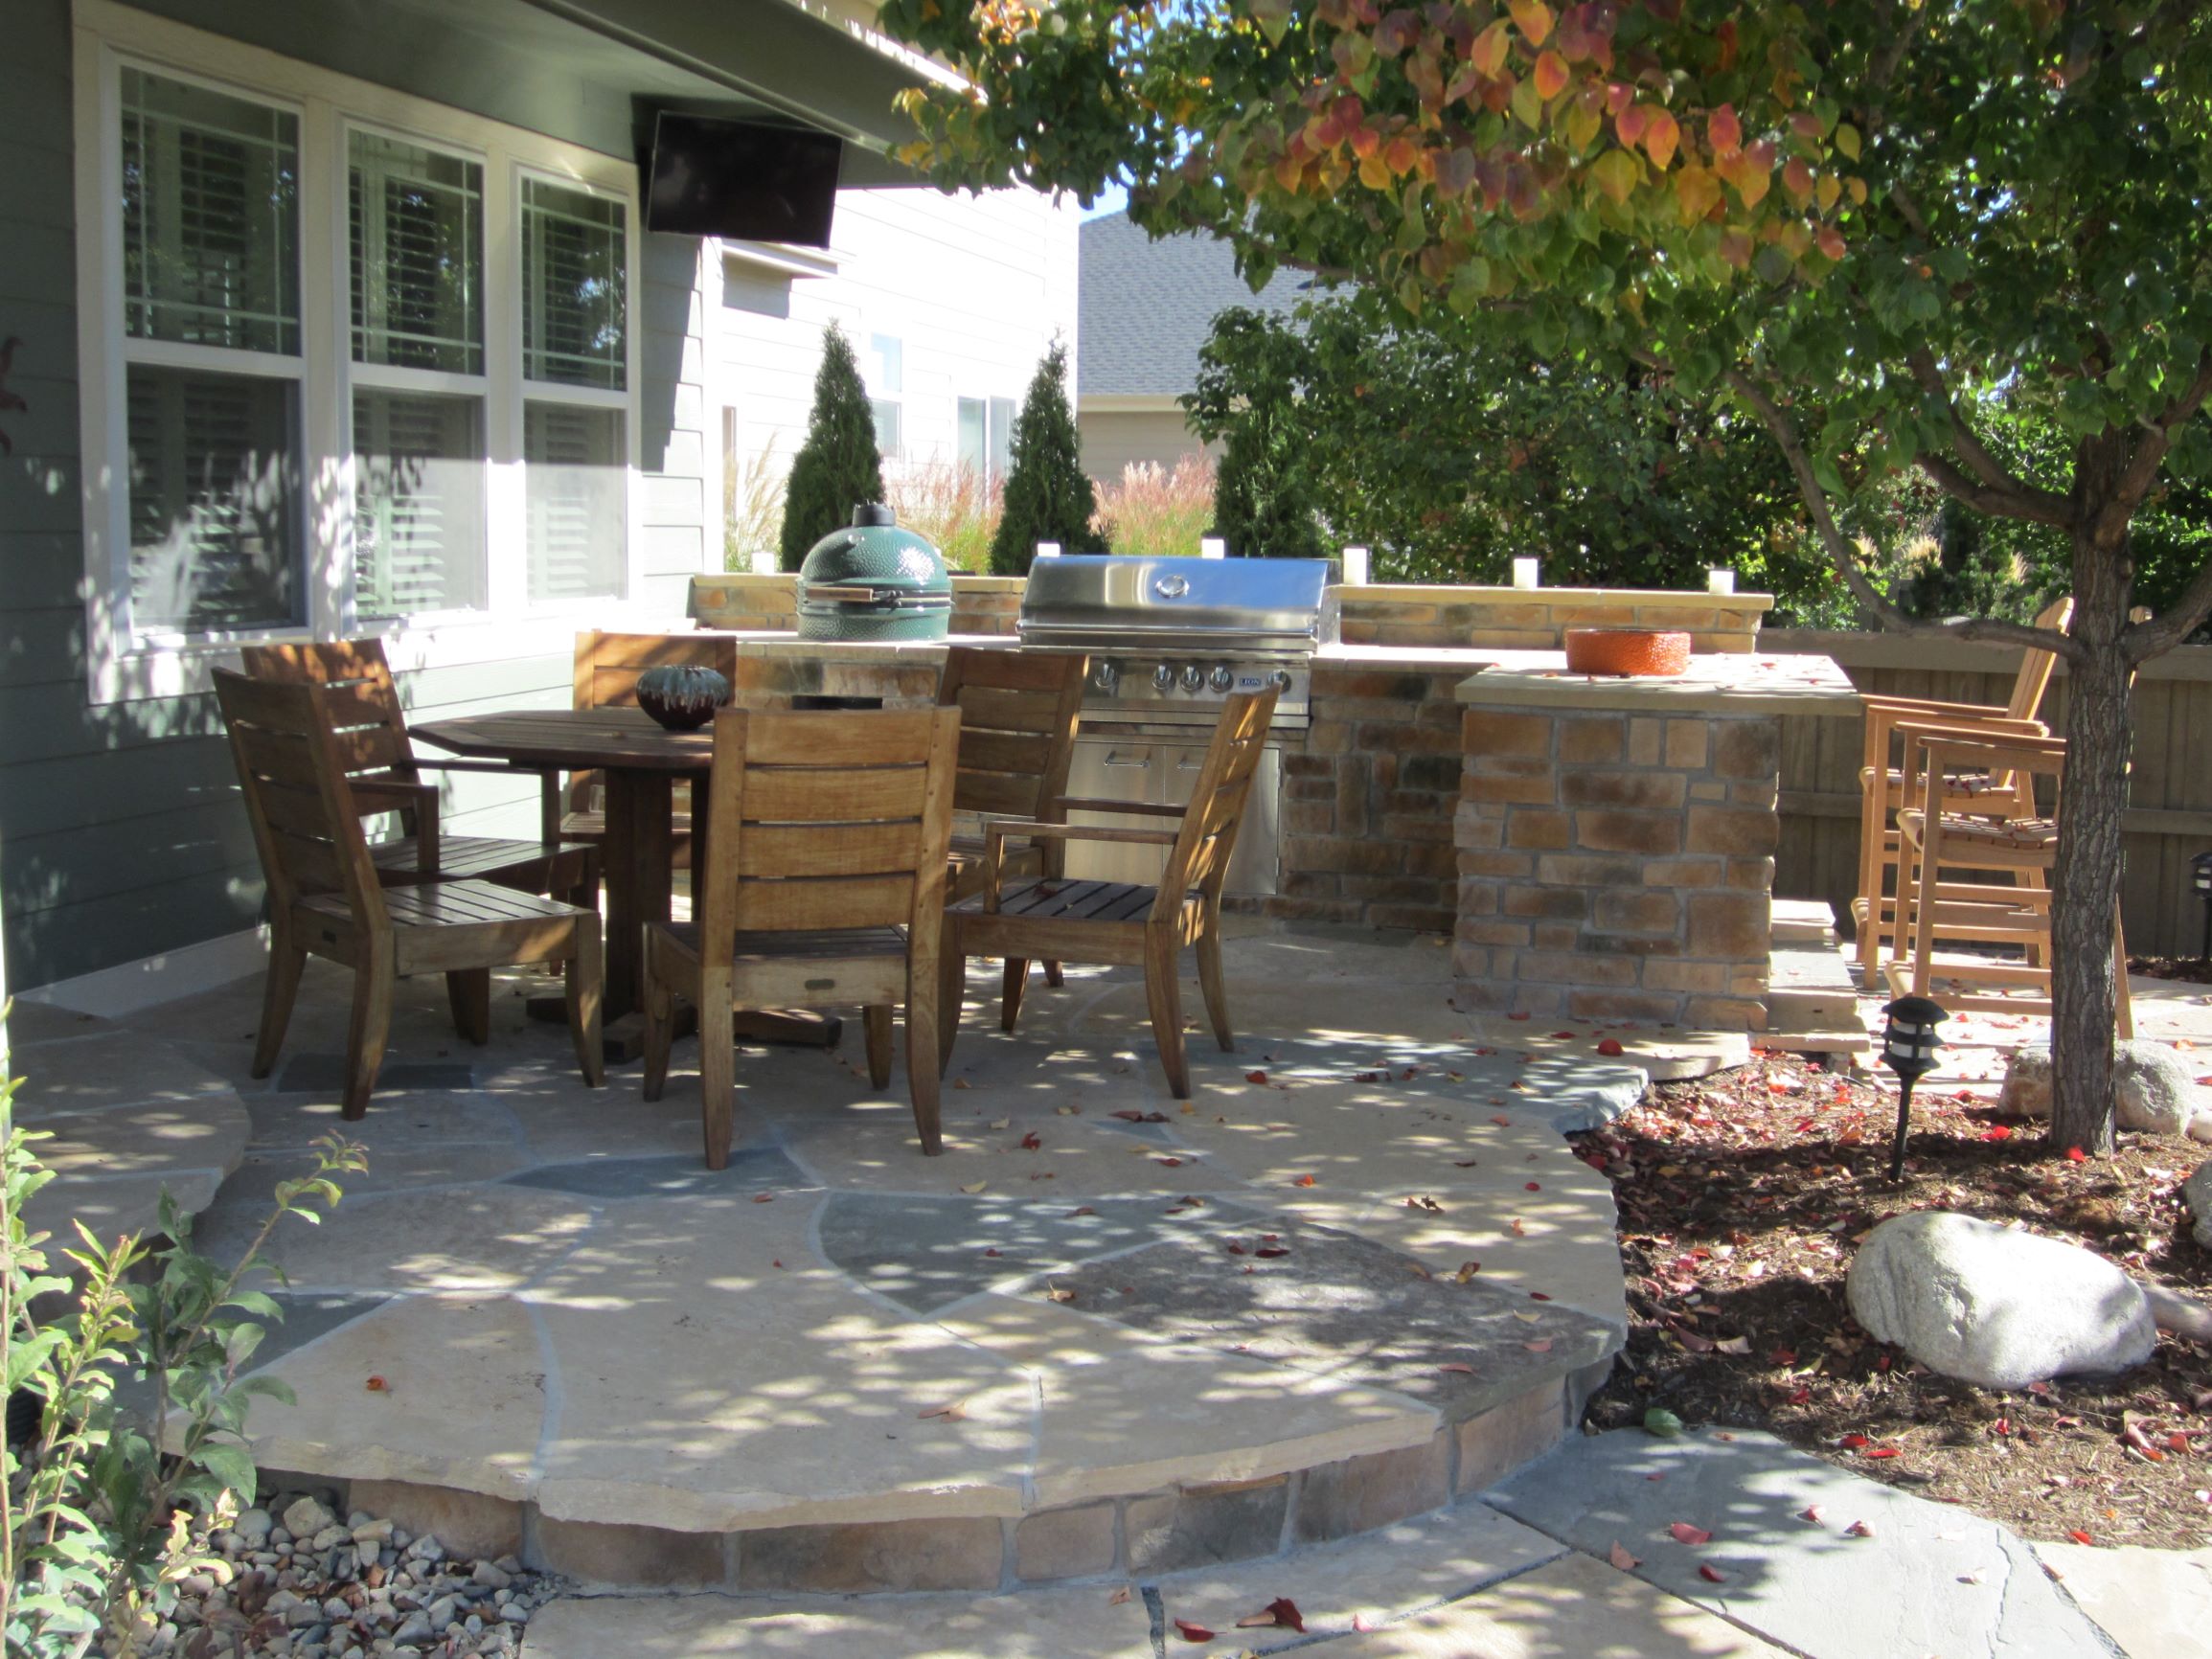 Flat stone patio with built in grilling station, and stone counter tops.